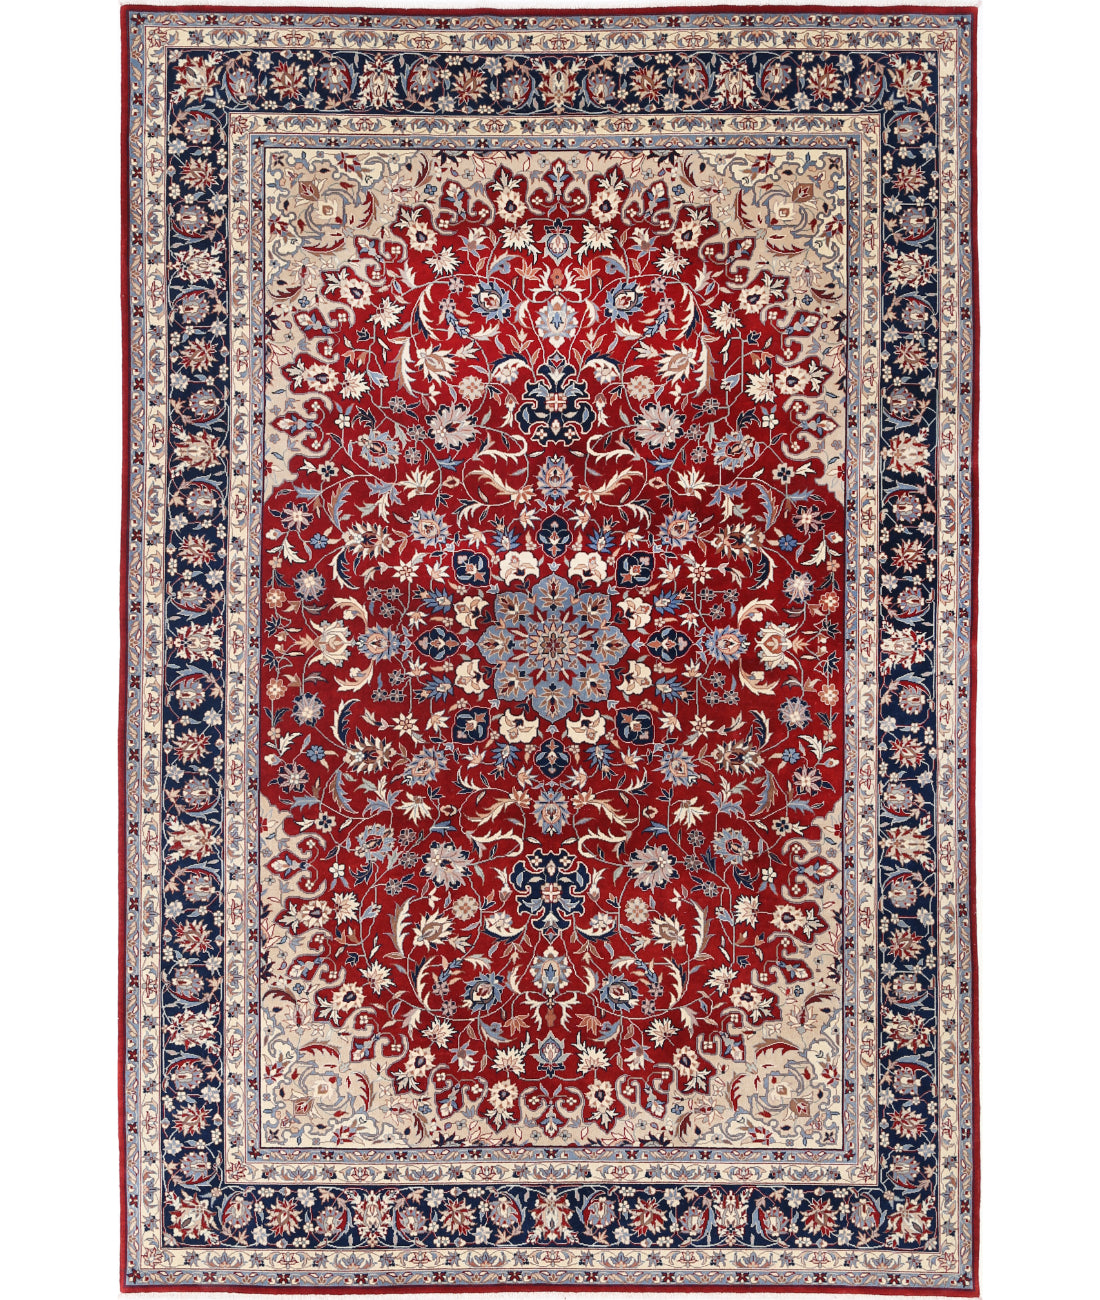 Heritage 6' 6" X 9' 10" Hand-Knotted Wool Rug 6' 6" X 9' 10" (198 X 300) / Red / Blue